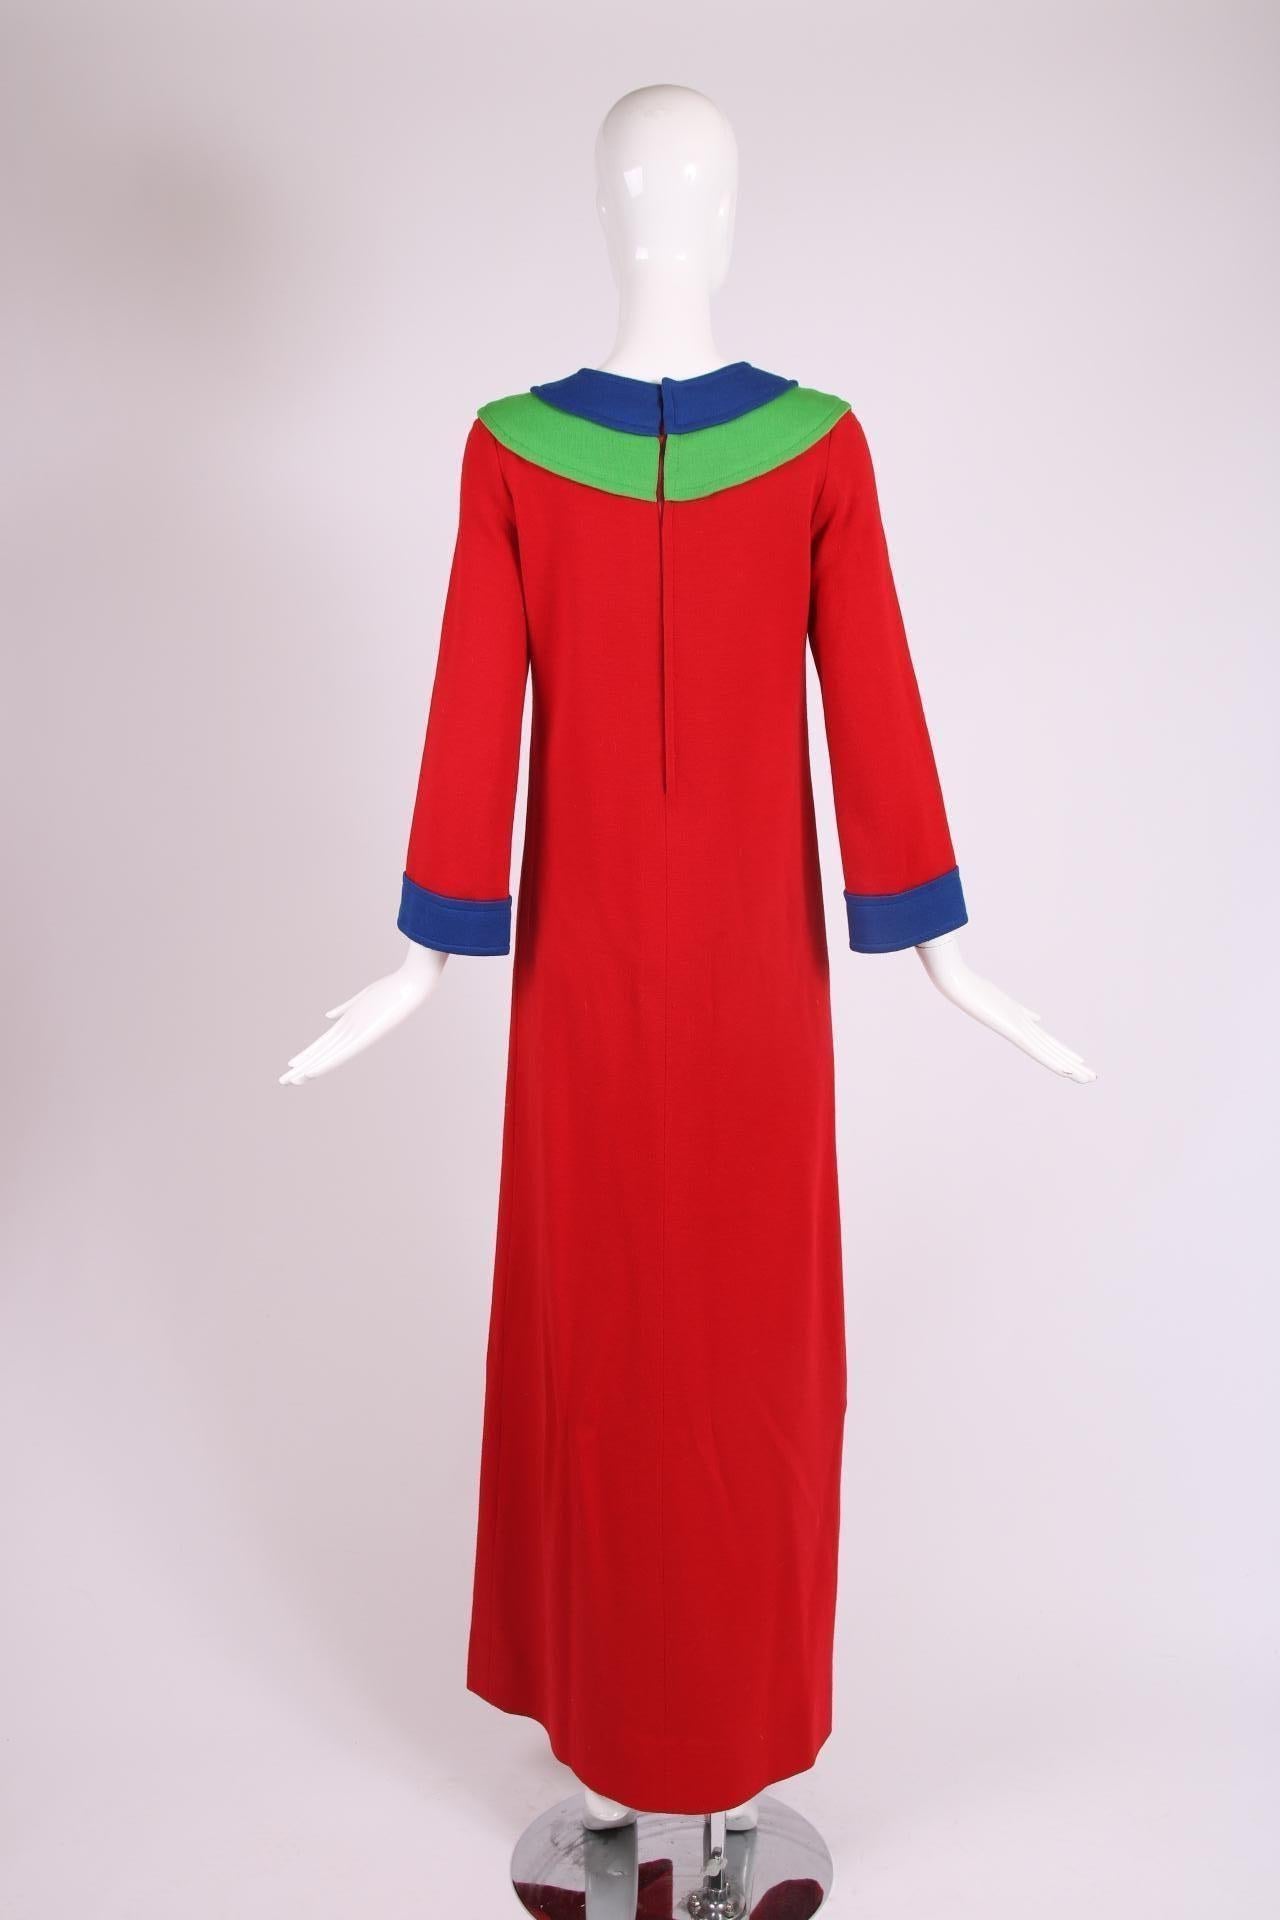 Yves Saint Laurent Red Wool Maxi Dress w/Blue & Green Colorblock Trim In Good Condition For Sale In Studio City, CA